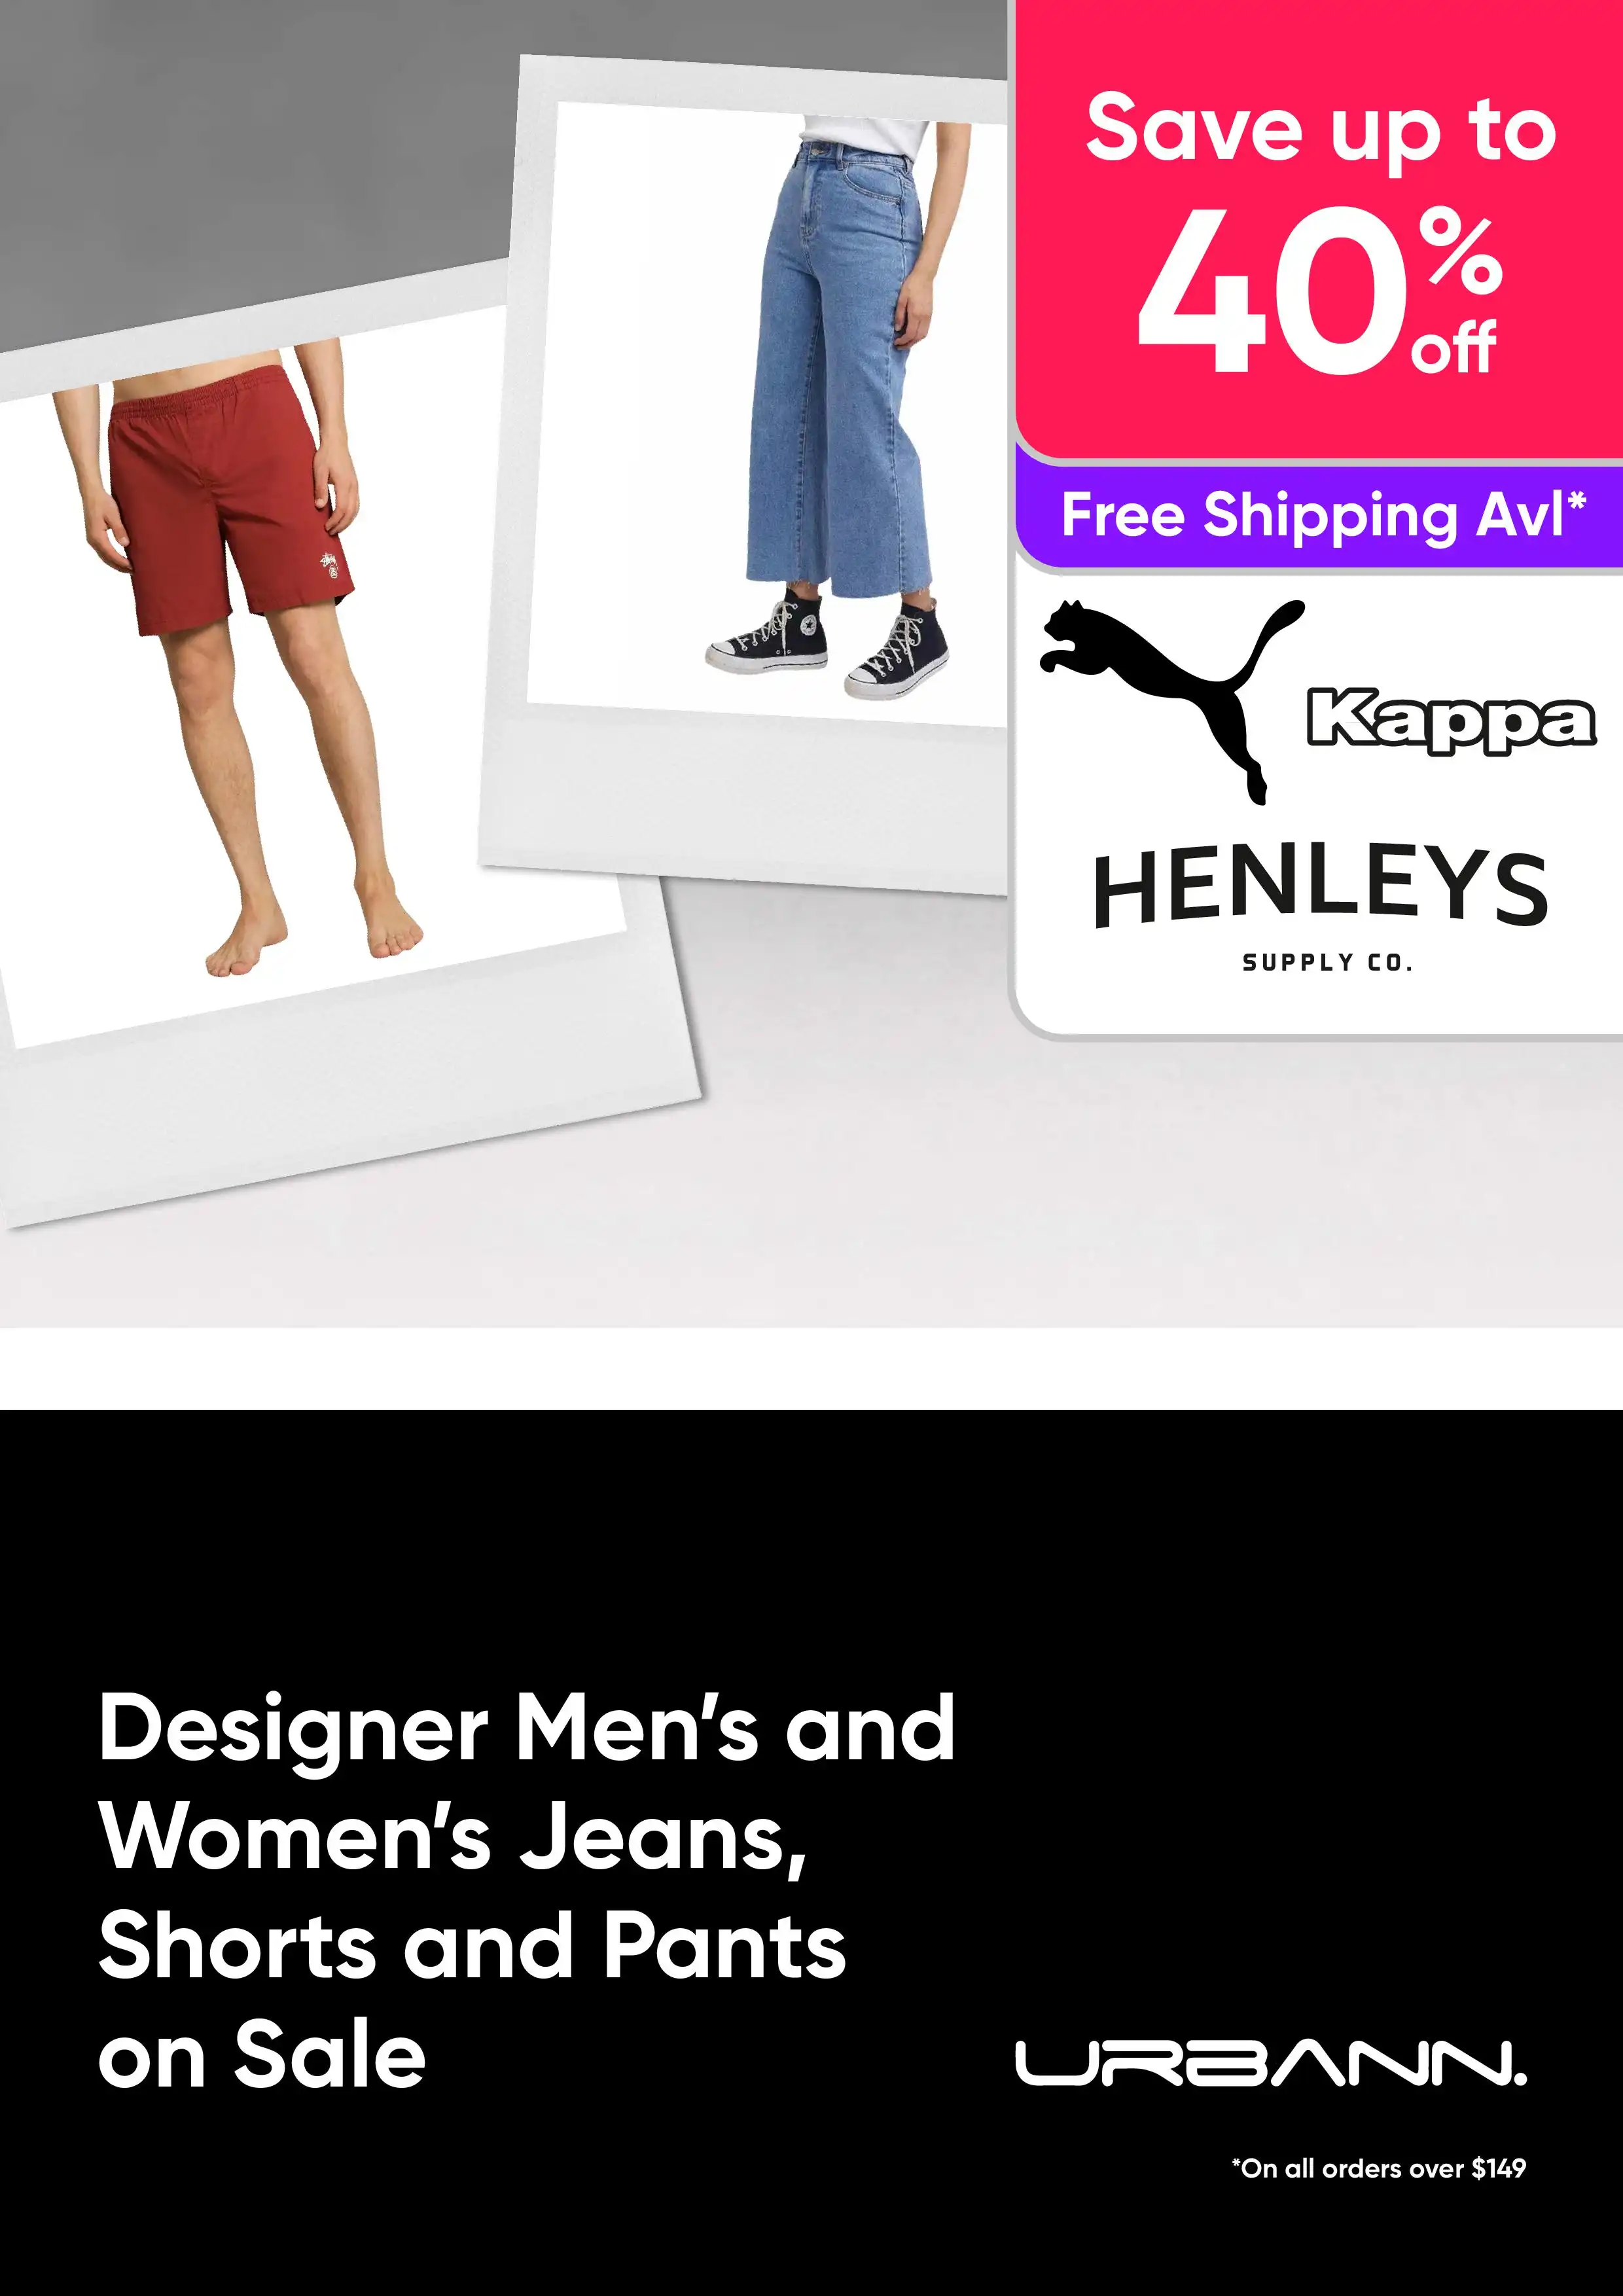 Designer Mens and Womens Jeans, Shorts and Pants on Sale - Save Up to 40% Off RRP